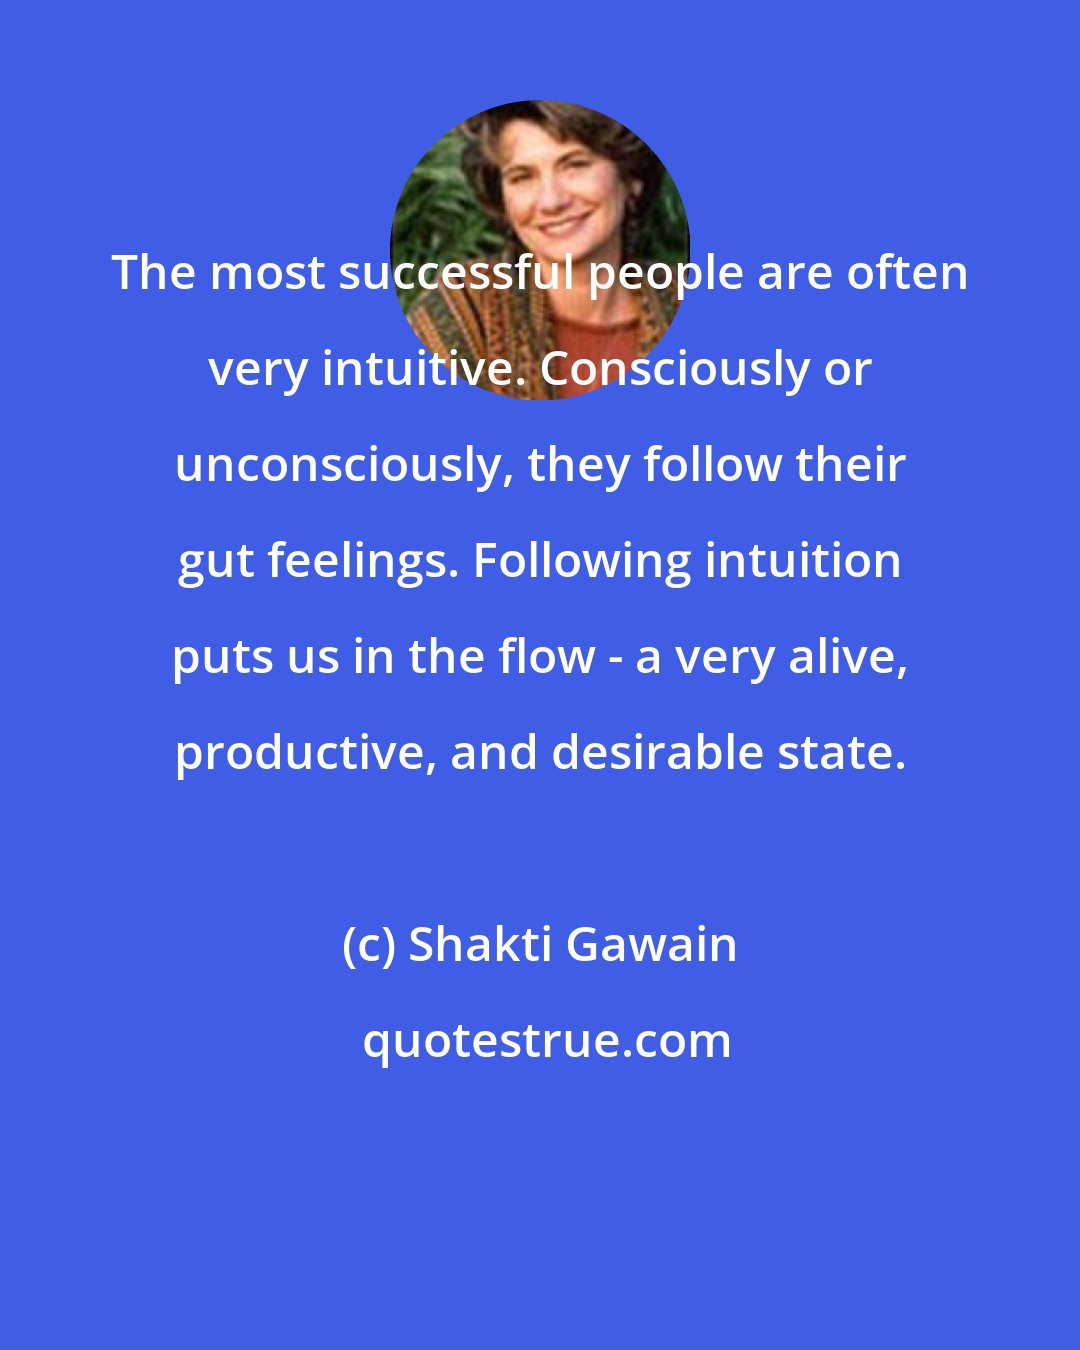 Shakti Gawain: The most successful people are often very intuitive. Consciously or unconsciously, they follow their gut feelings. Following intuition puts us in the flow - a very alive, productive, and desirable state.